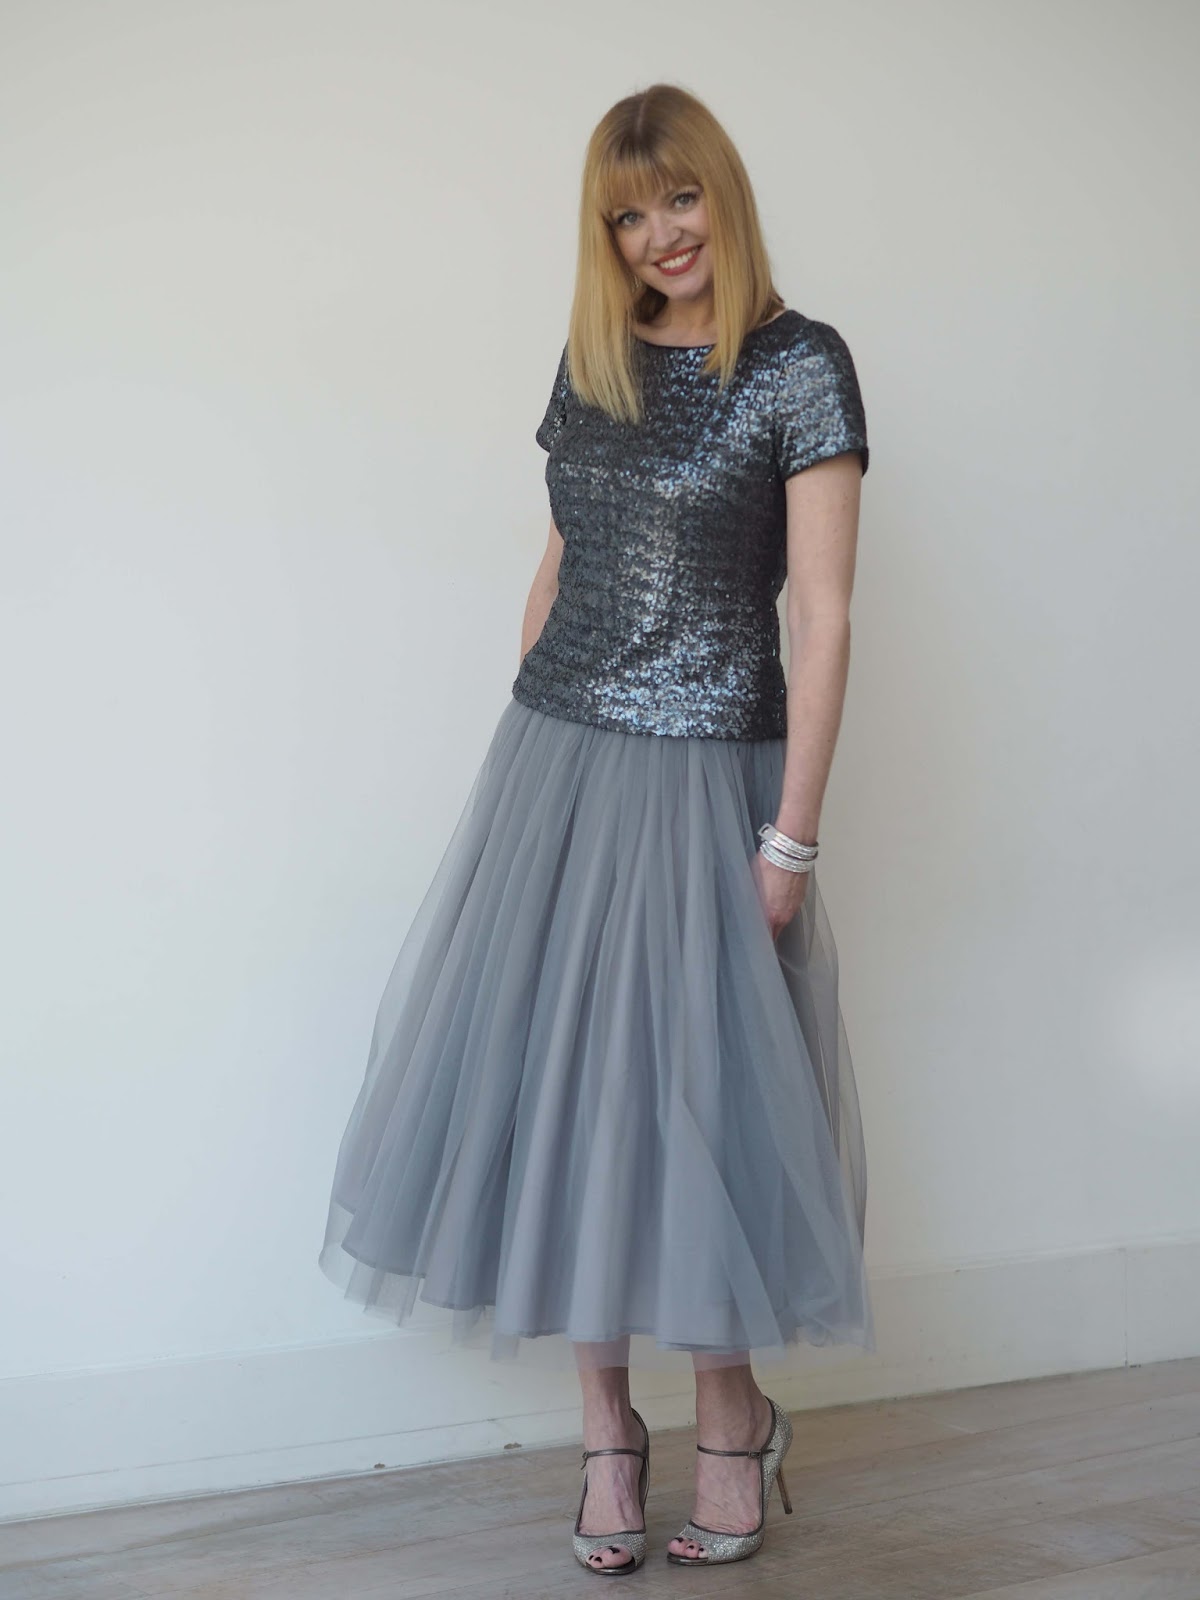 A Dreamy Tulle Skirt with all of the ...